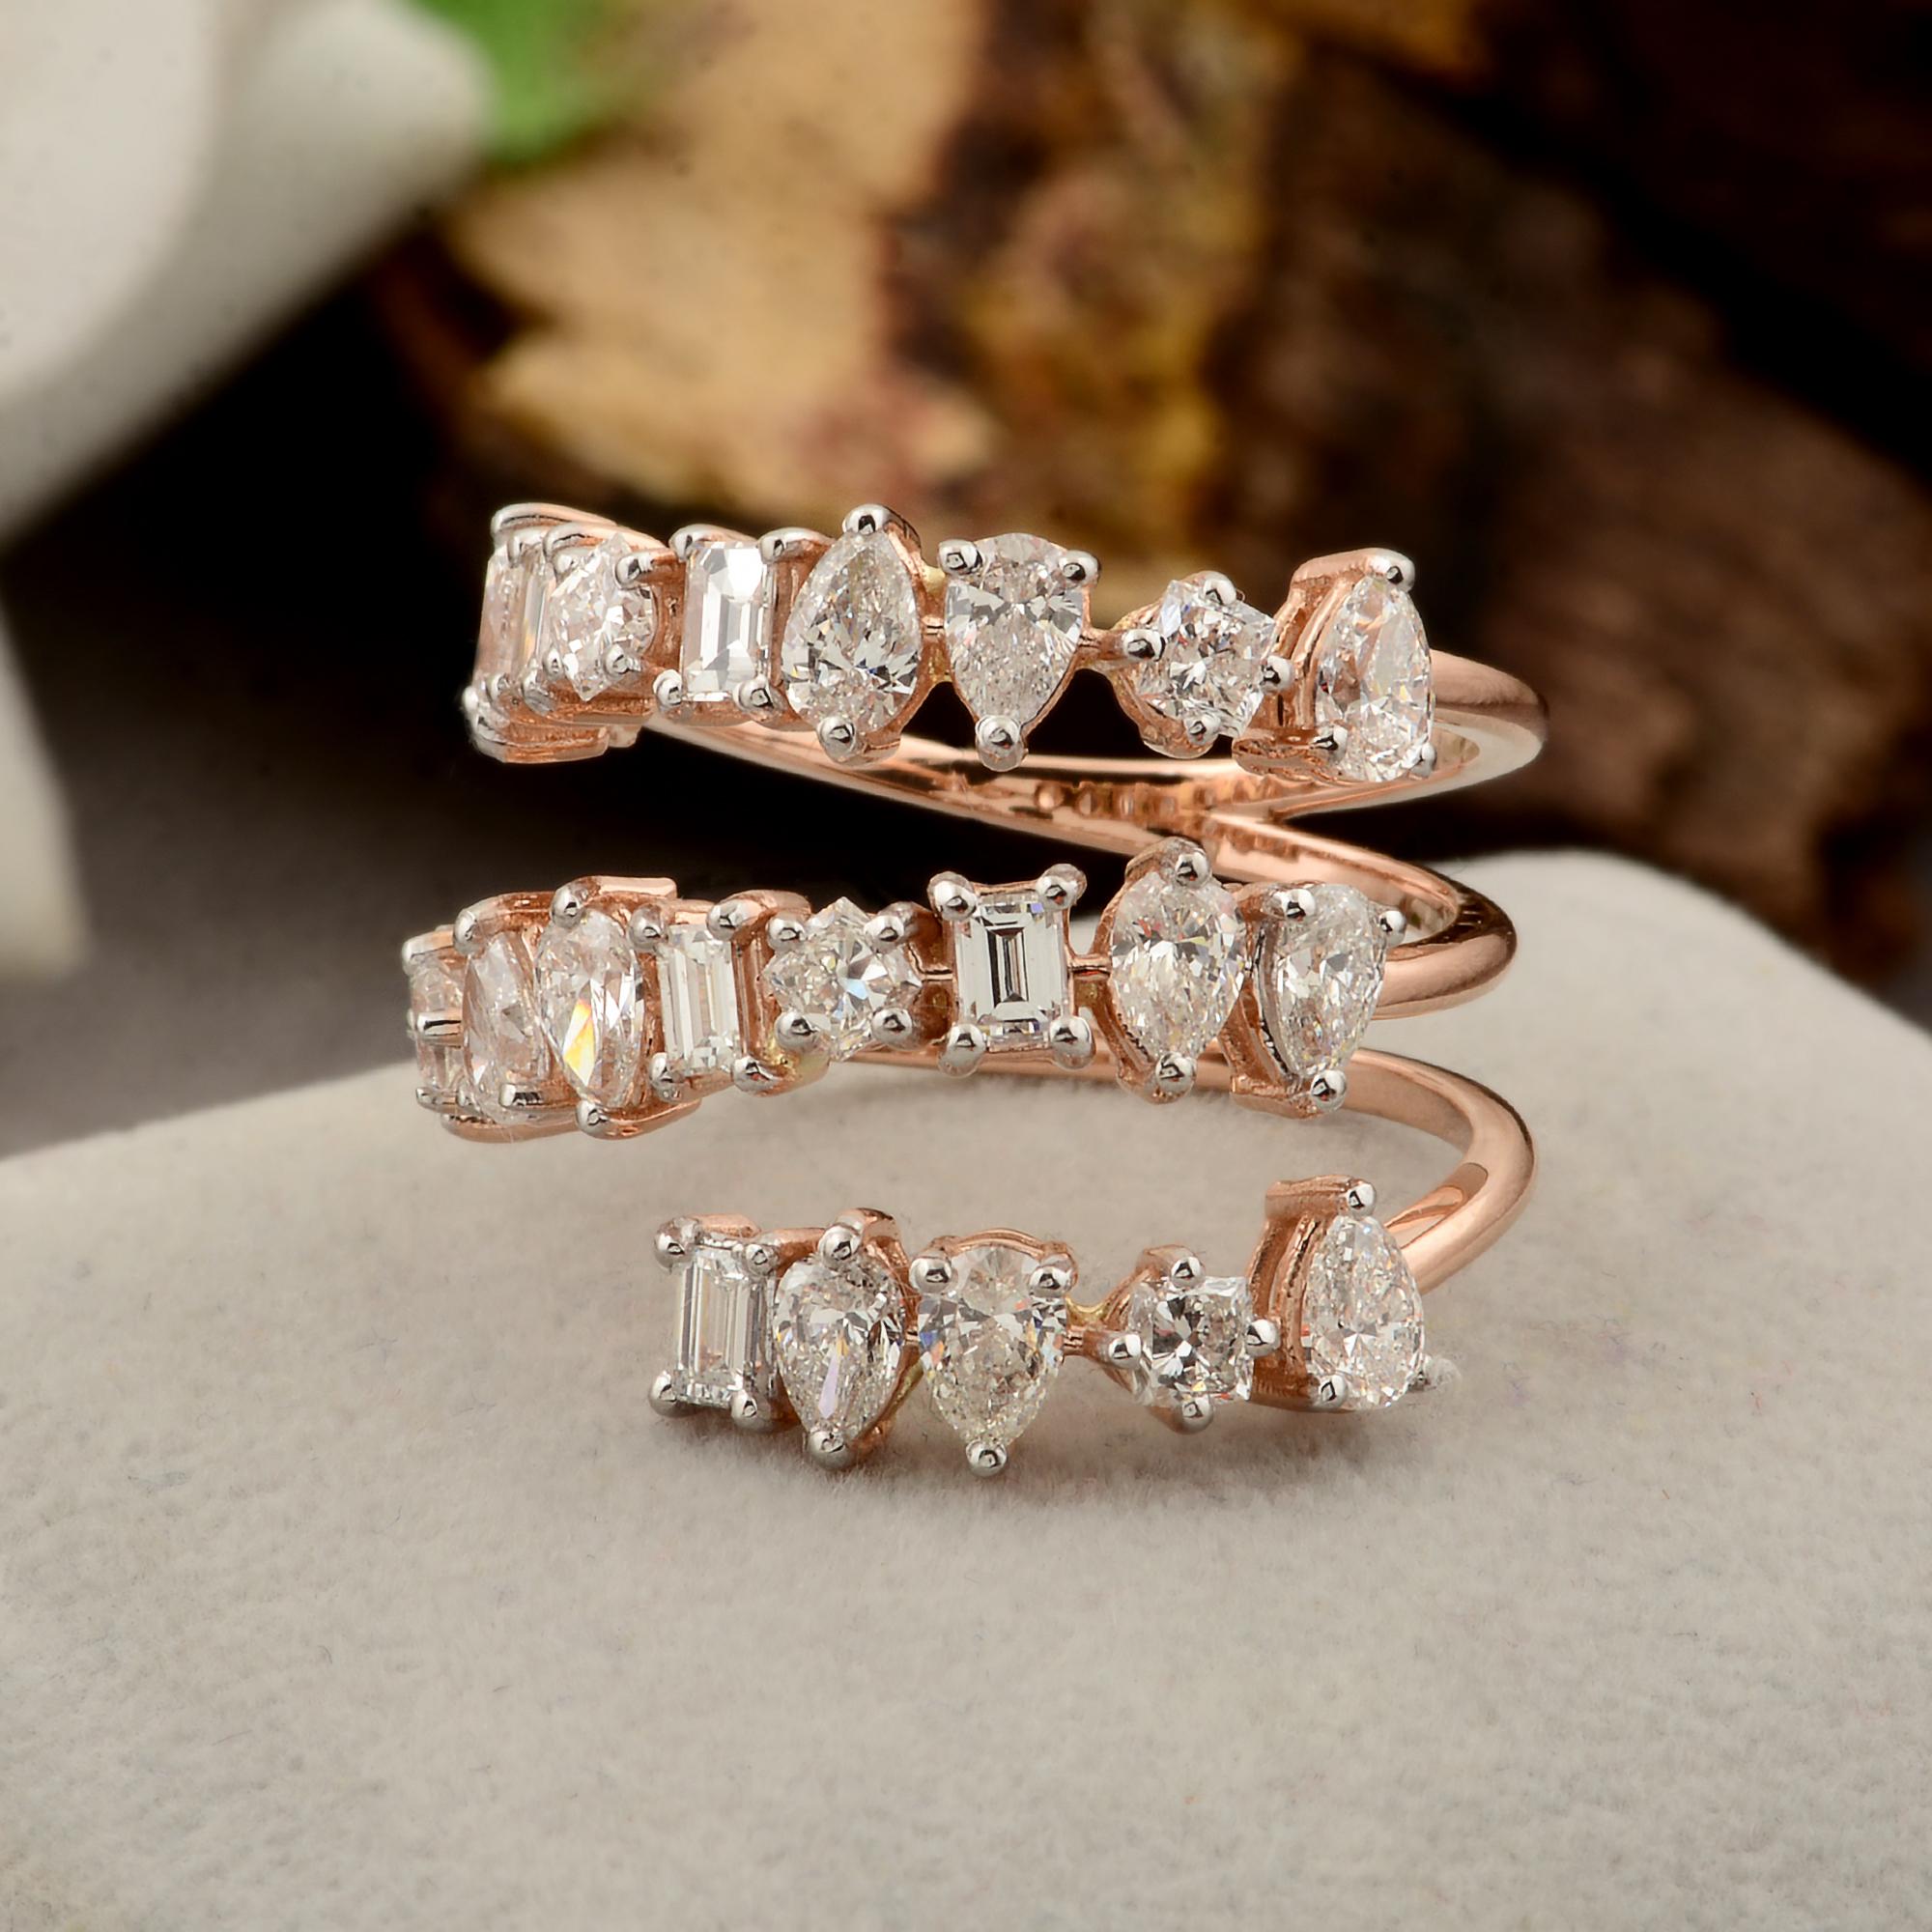 For Sale:  2.70 Carat Pear Baguette Diamond Wrap Ring Solid 18k Rose Gold Handmade Jewelry 4